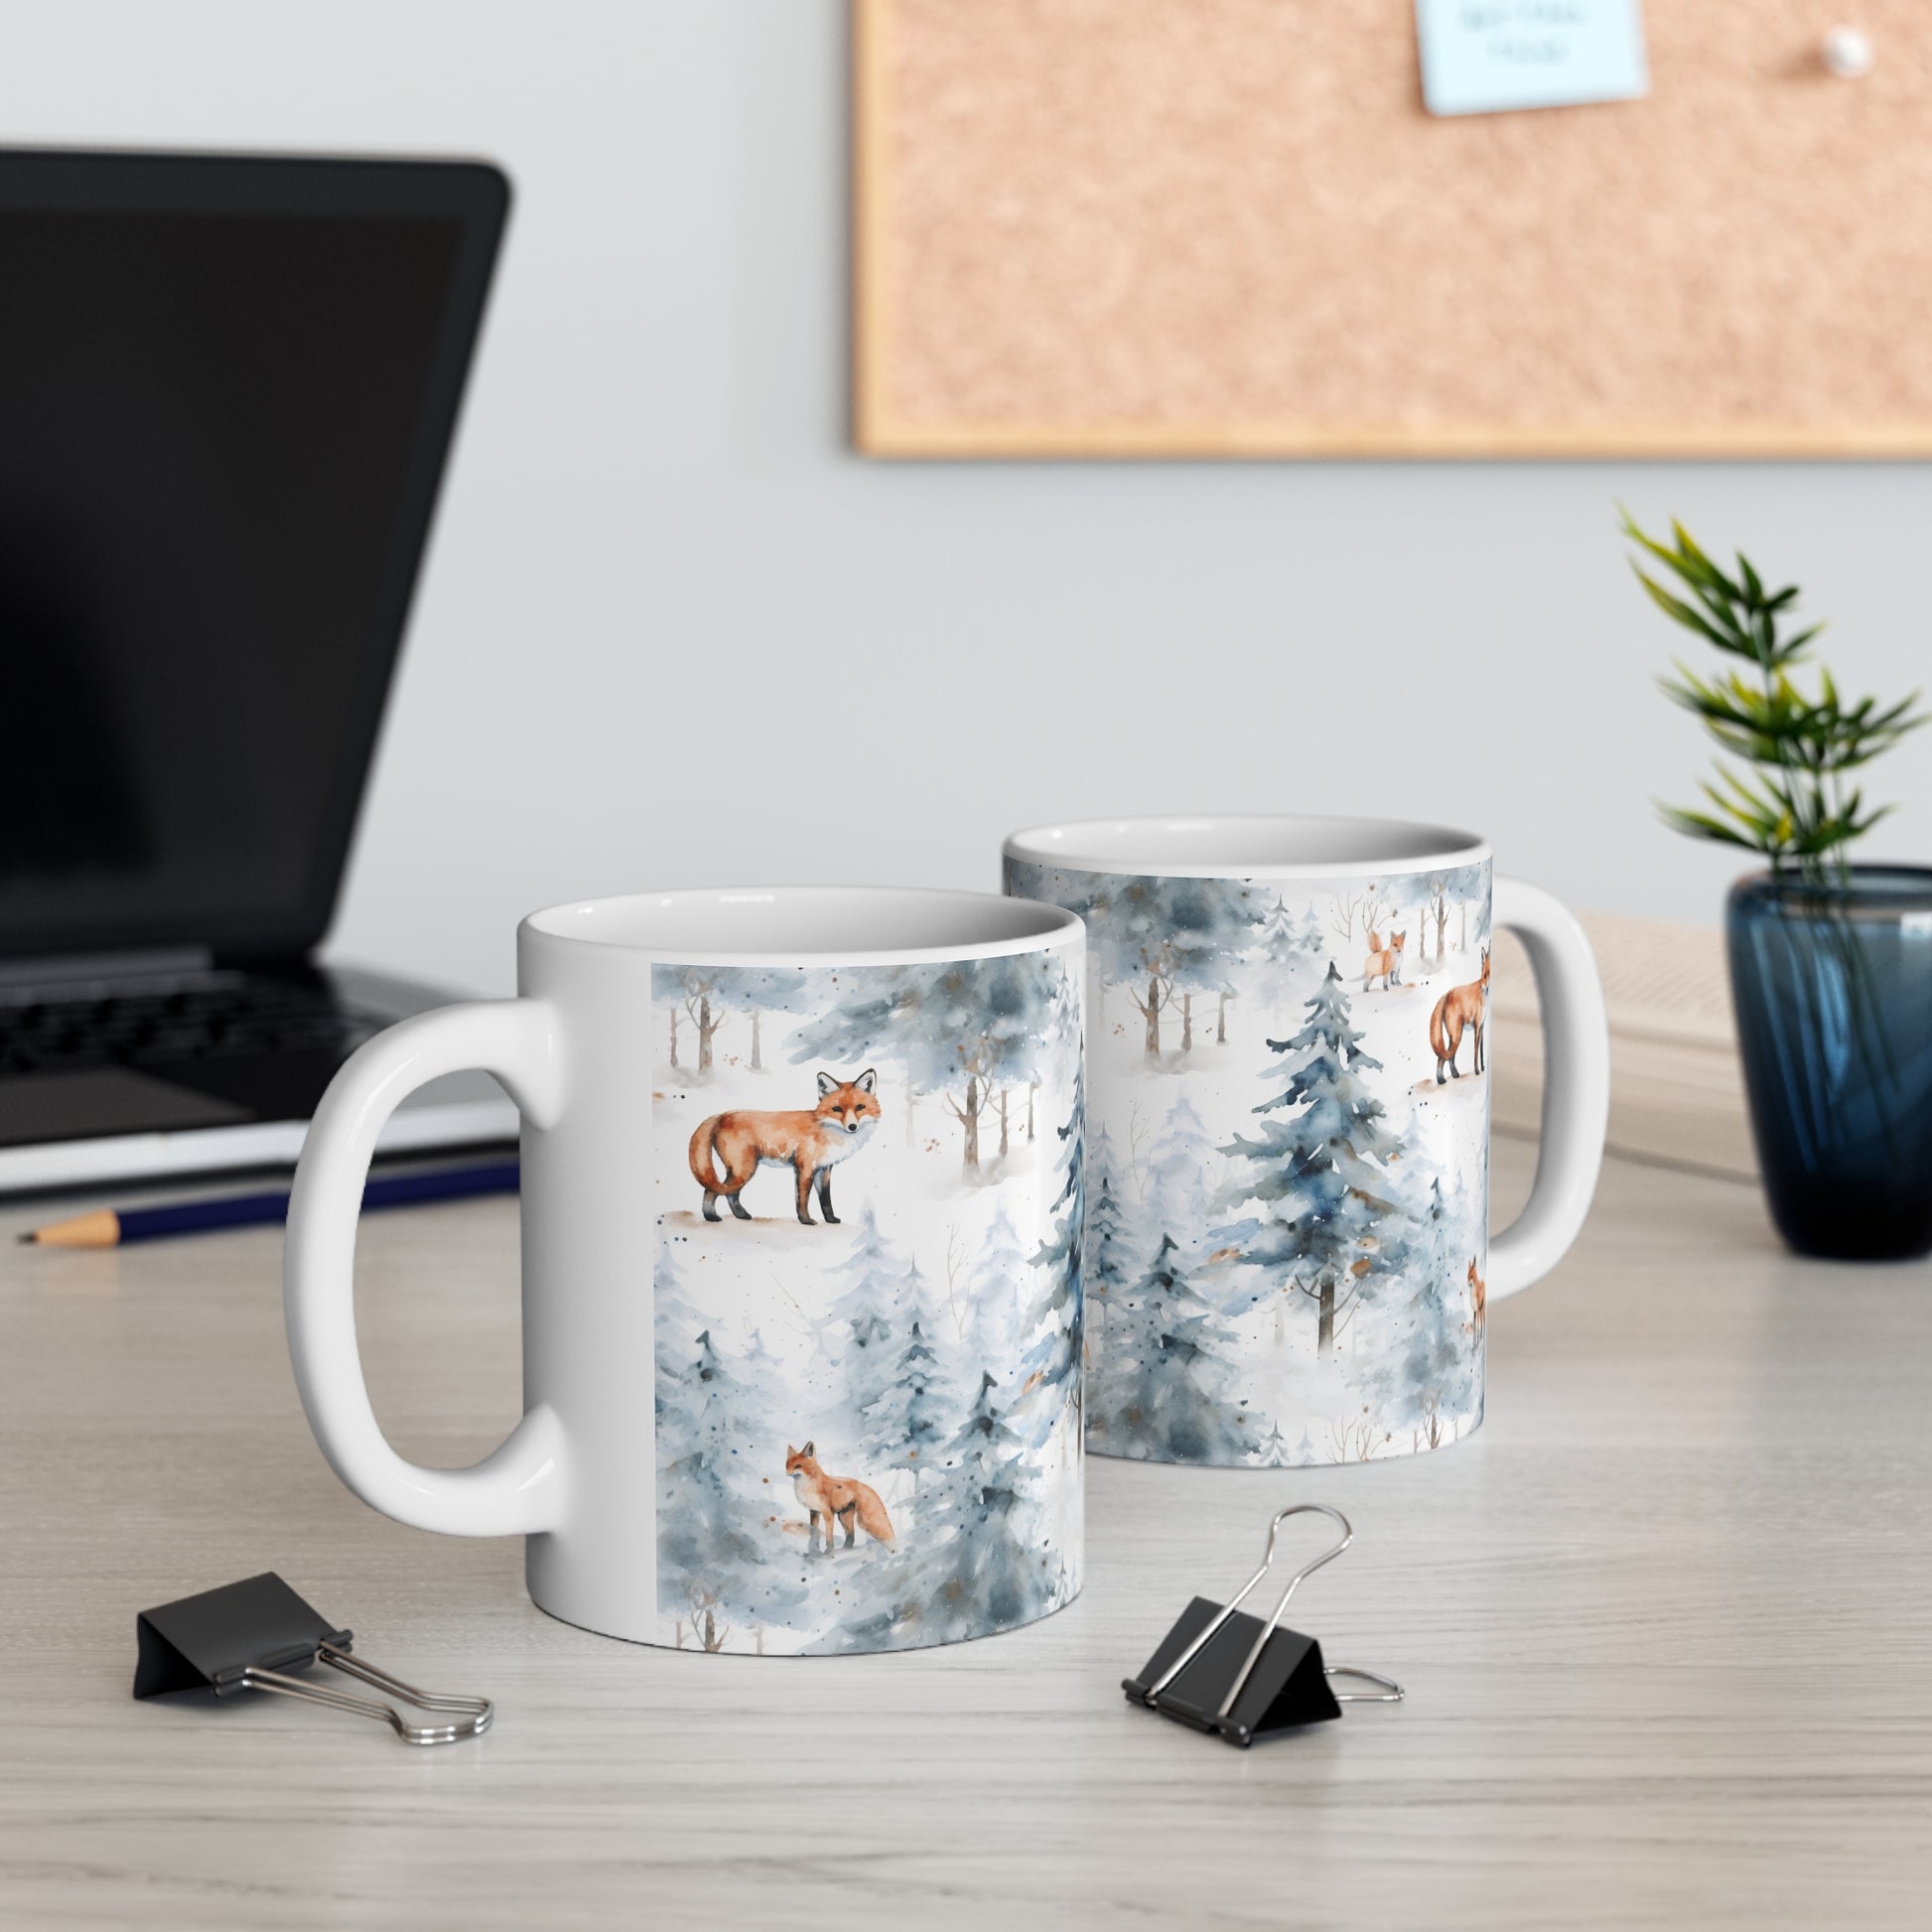 Ginger Fox Coffee Mug, Winter Landscape Forest Trees Woodlands Snow Cute Animal Art Ceramic Cup Tea Hot Chocolate Unique Novelty Cool Gift Starcove Fashion